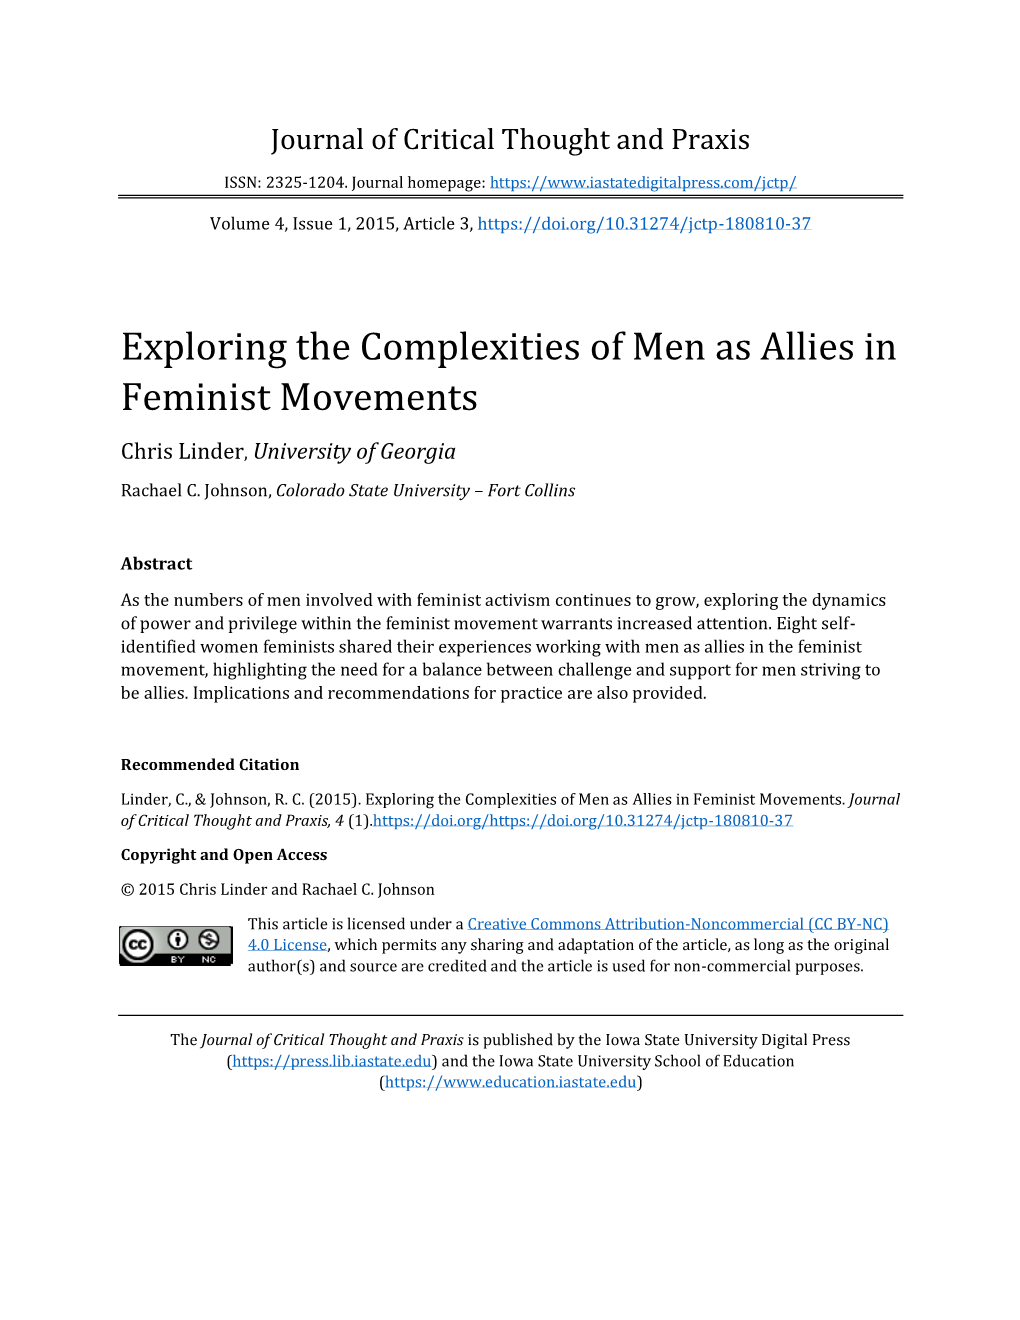 Exploring the Complexities of Men As Allies in Feminist Movements